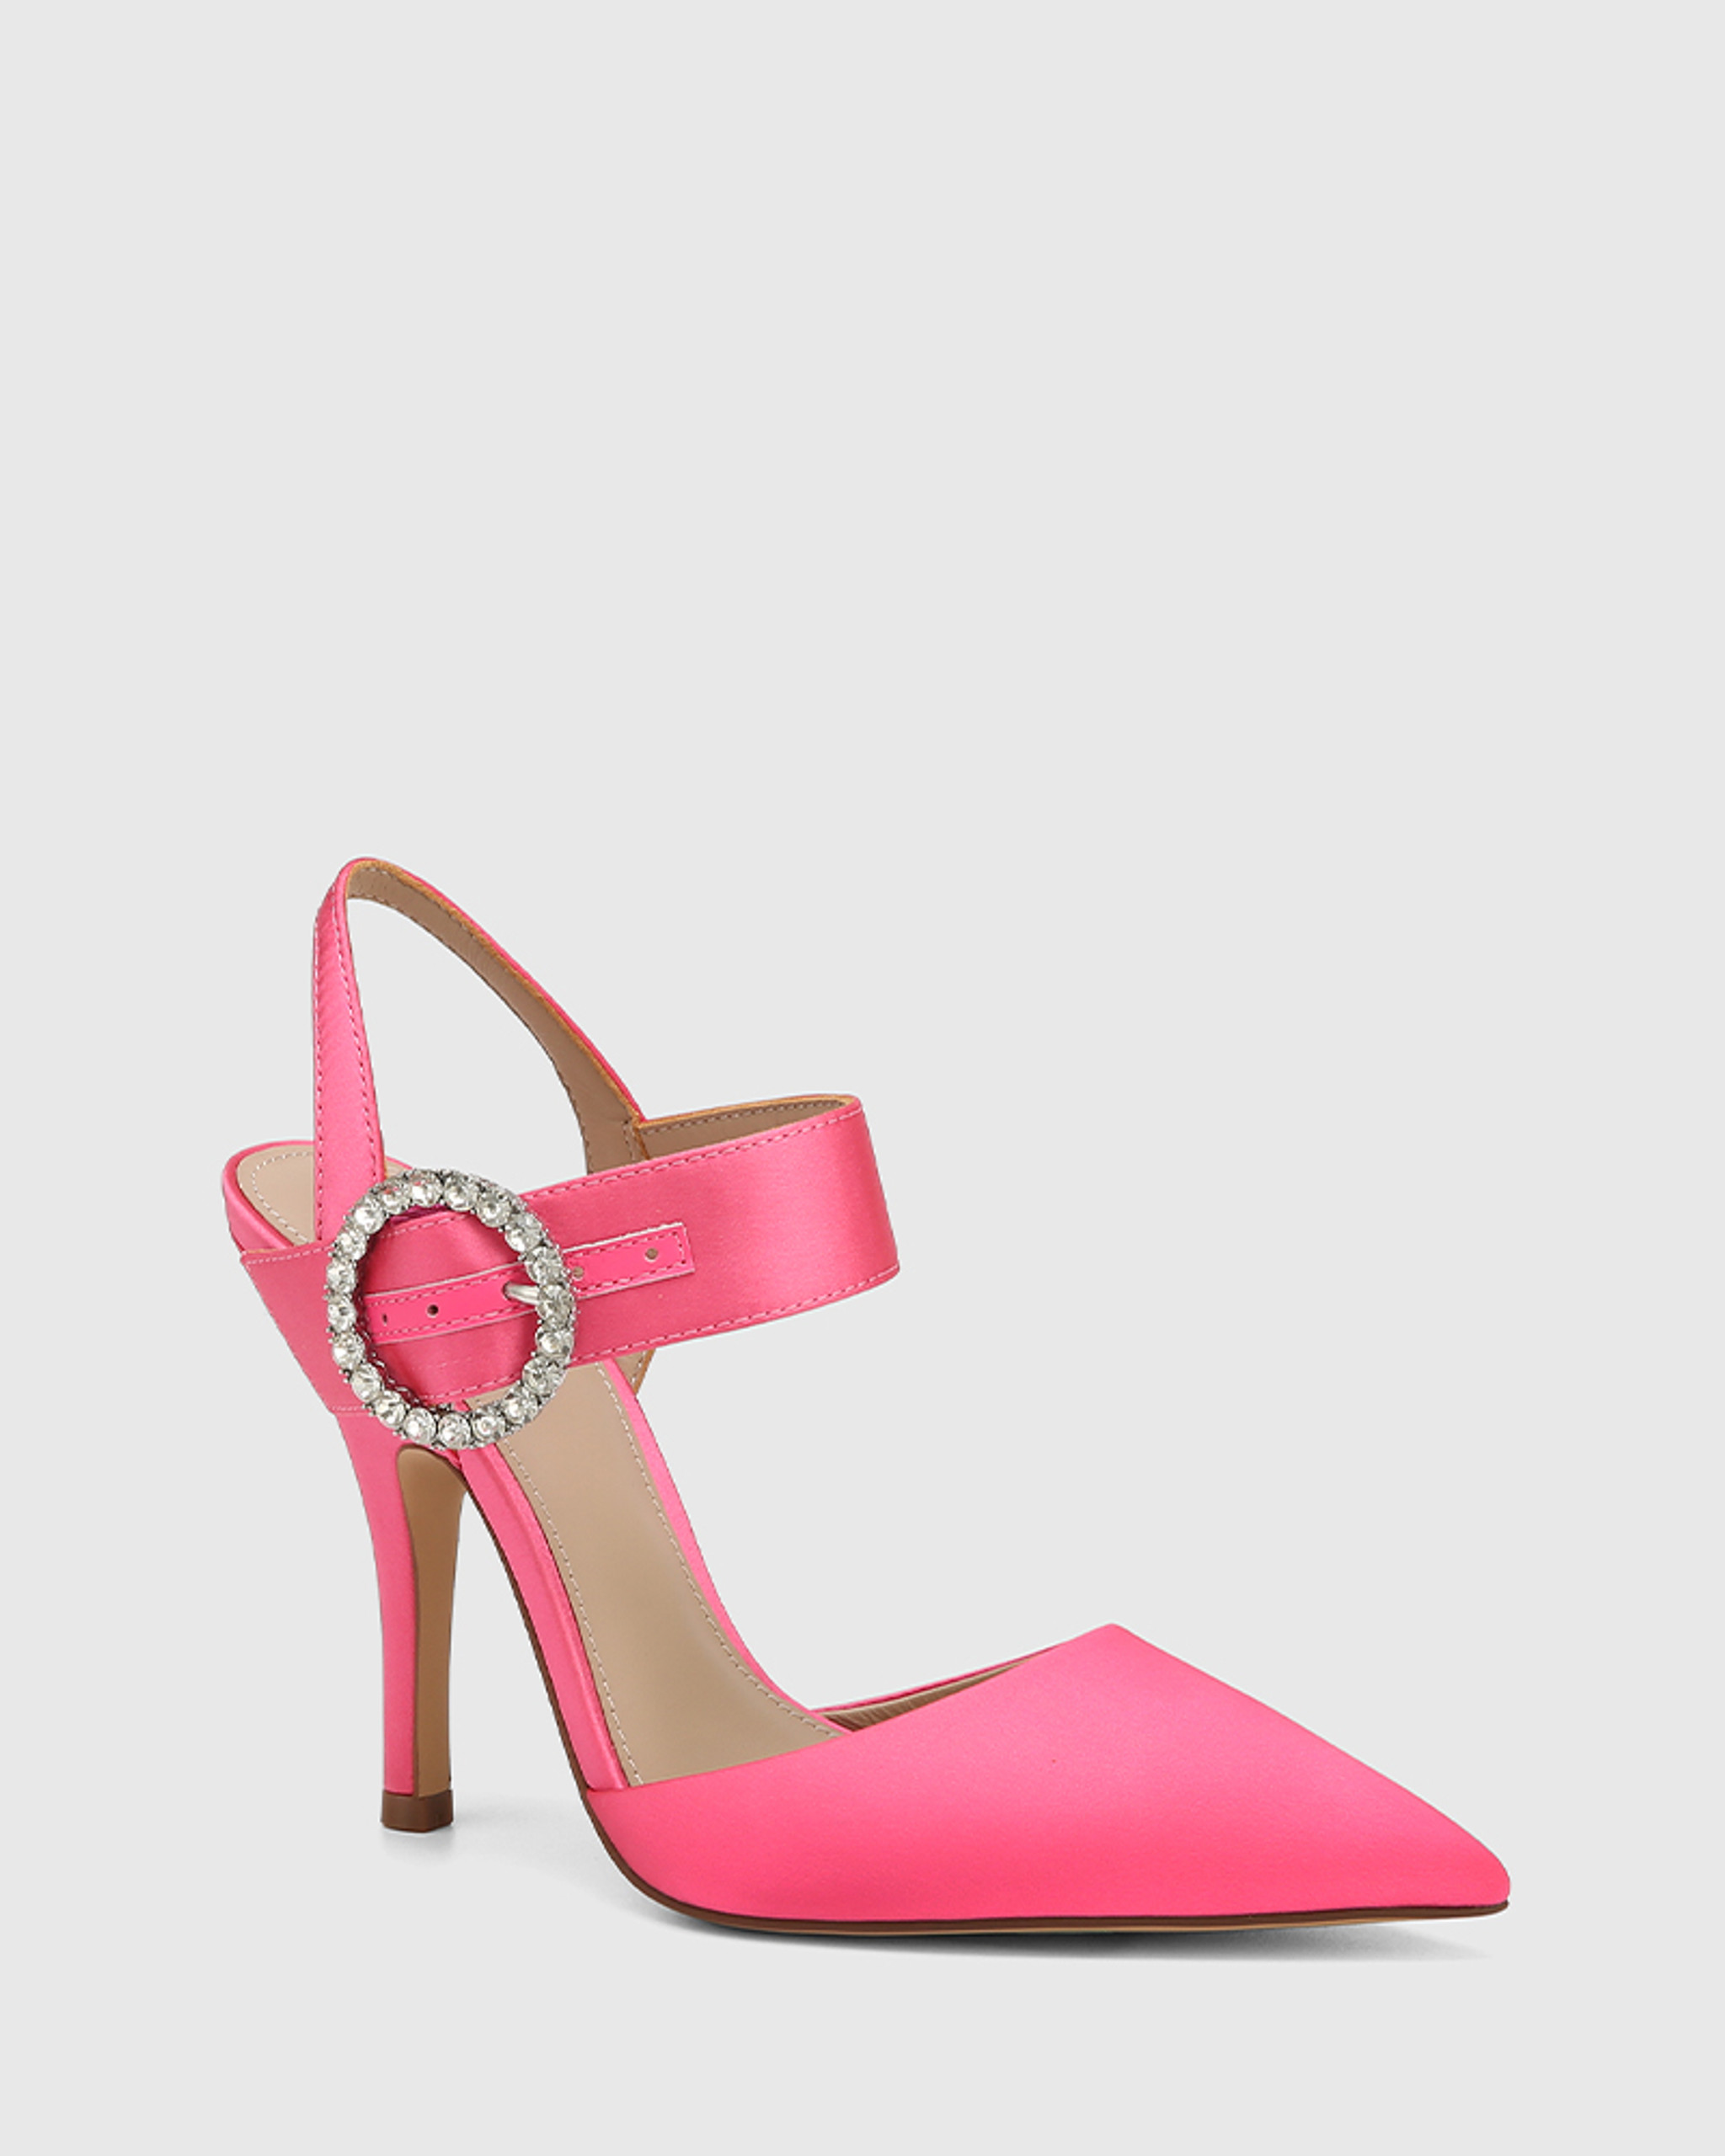 New Look Satin Ankle Tie Heeled Sandals in Pink | Lyst UK